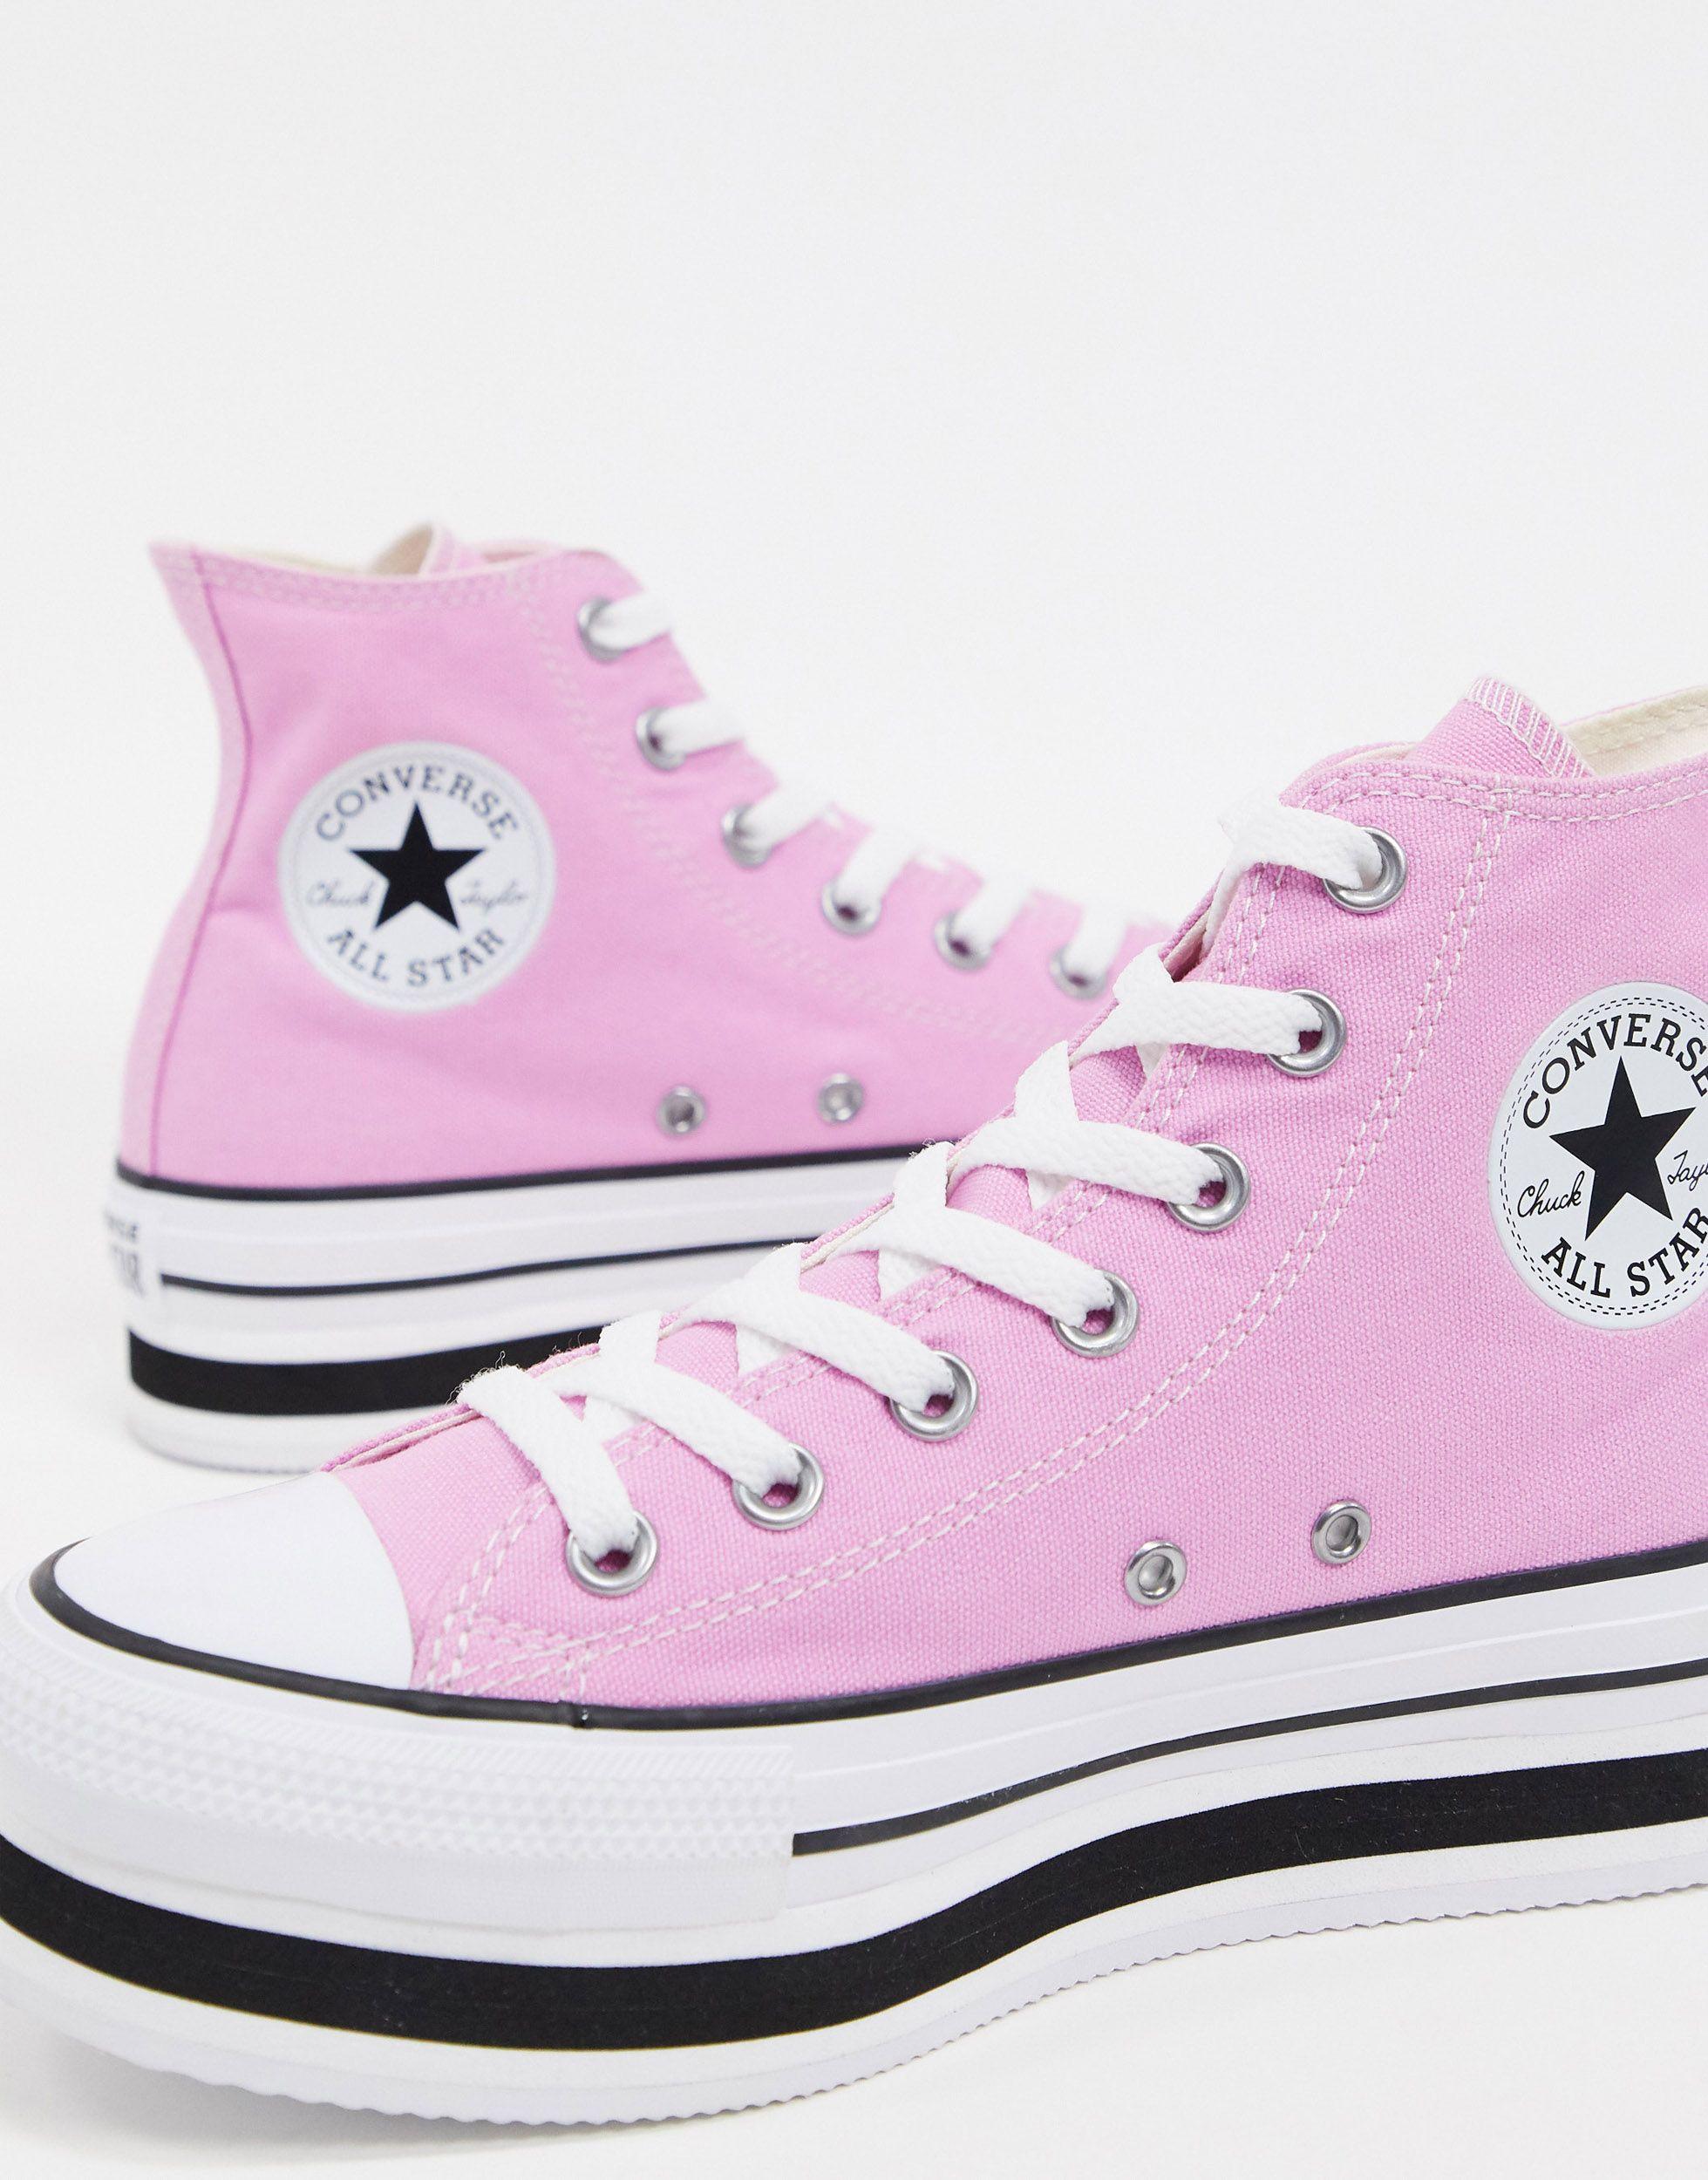 Converse Rubber Chuck Taylor Hi Layer Flatform Pink Sneakers | Lyst